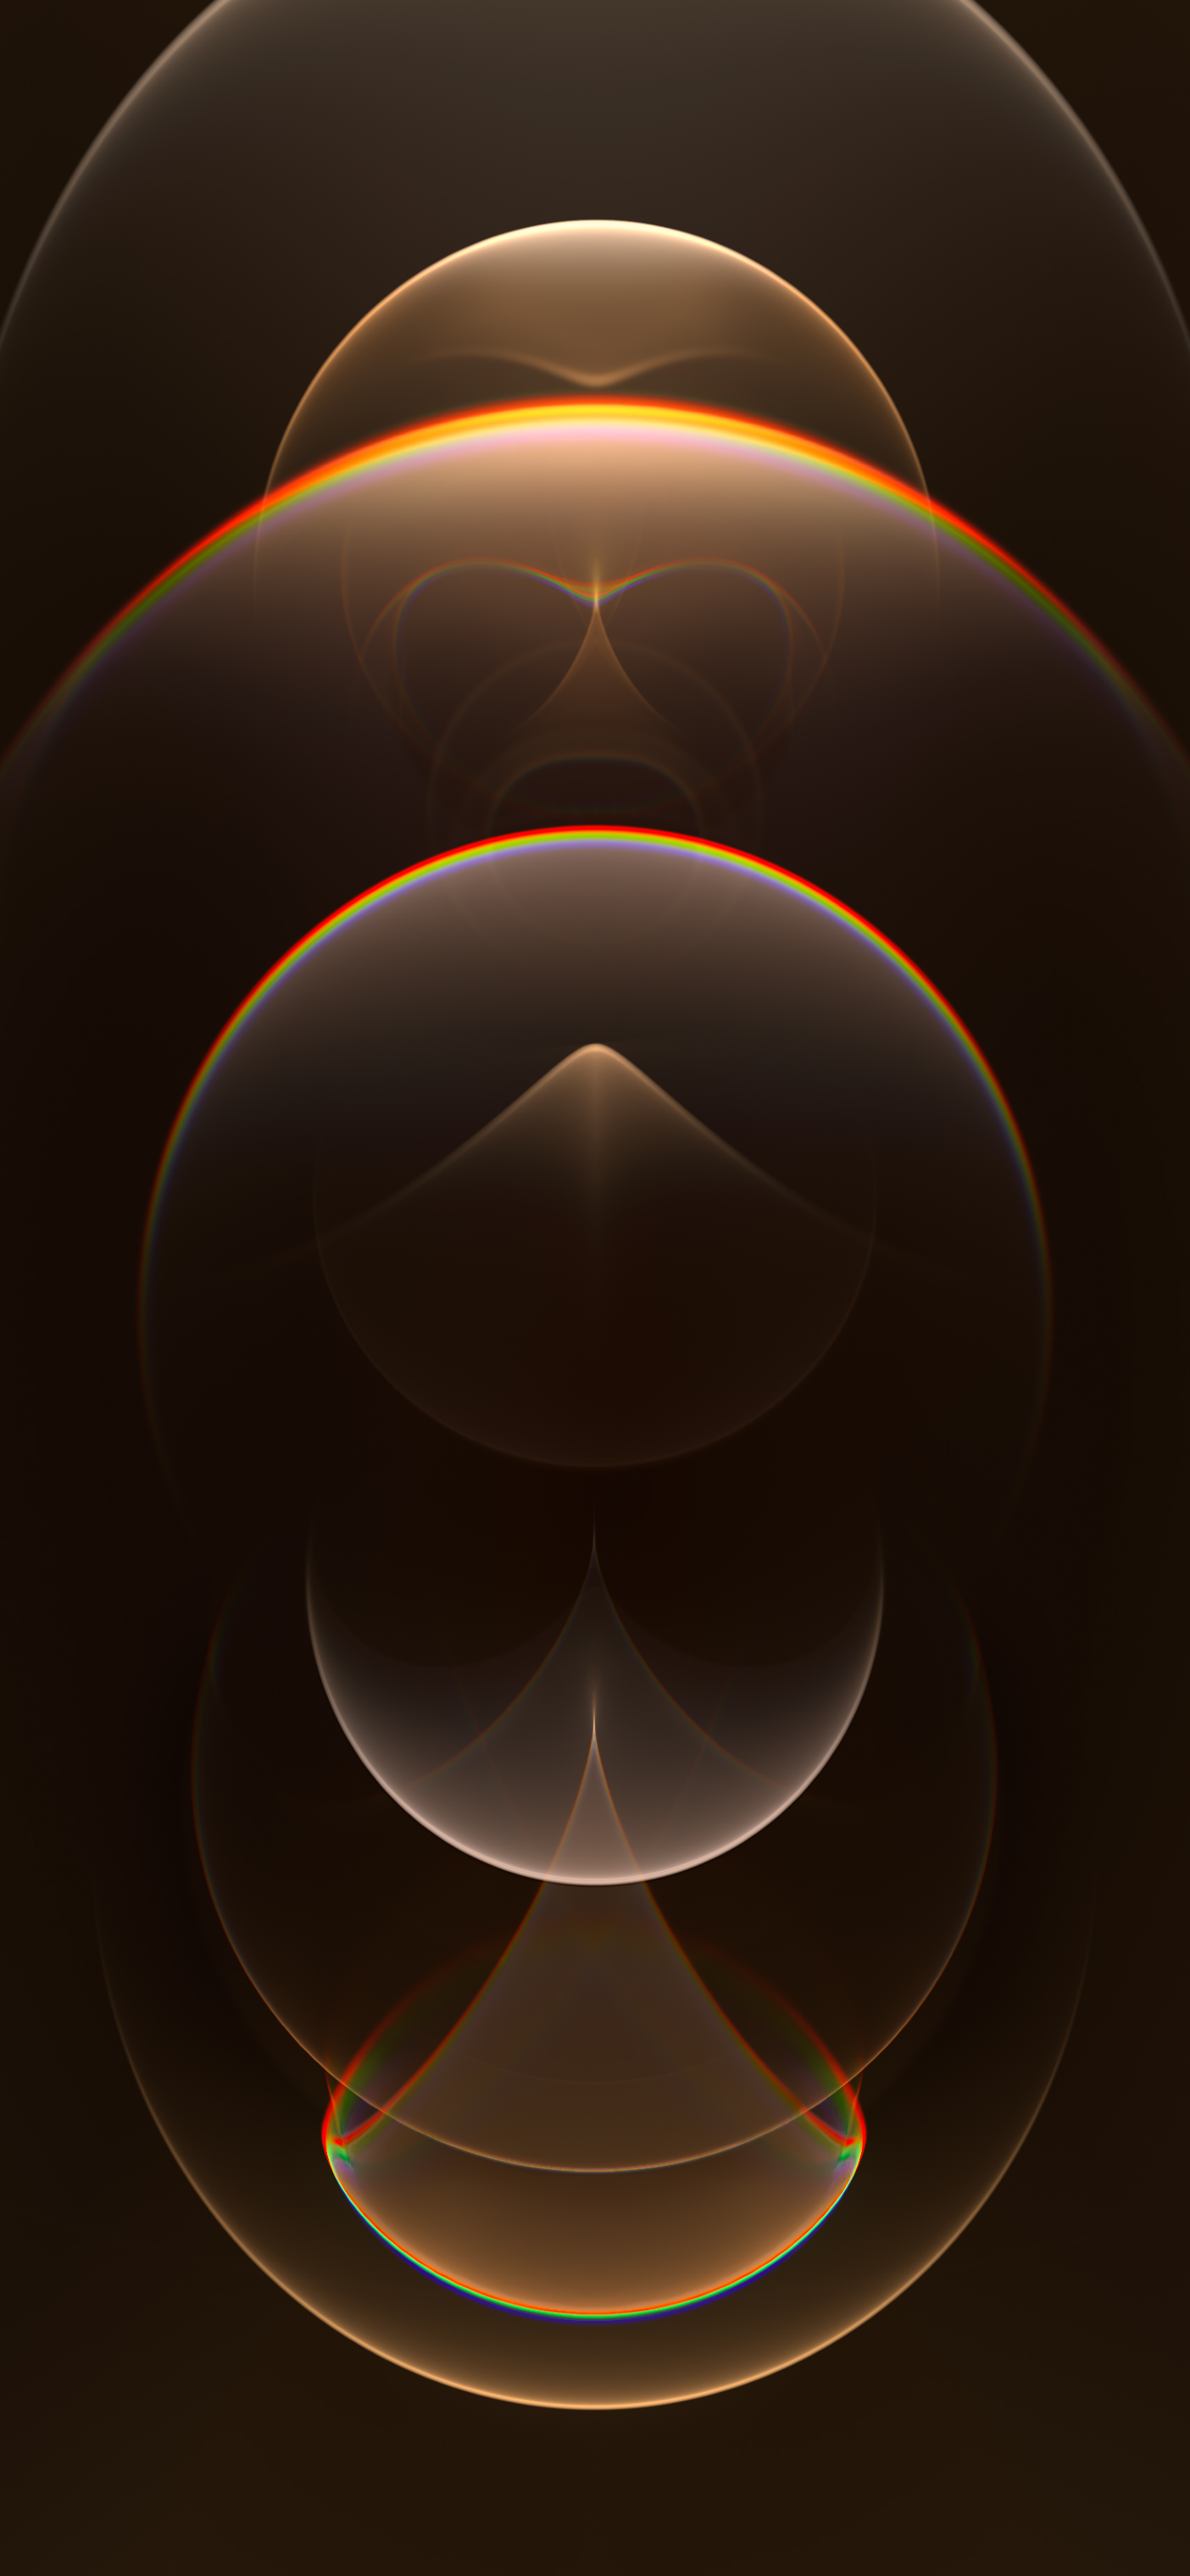 Premium AI Image | Black and gold wallpaper for iphone and android.